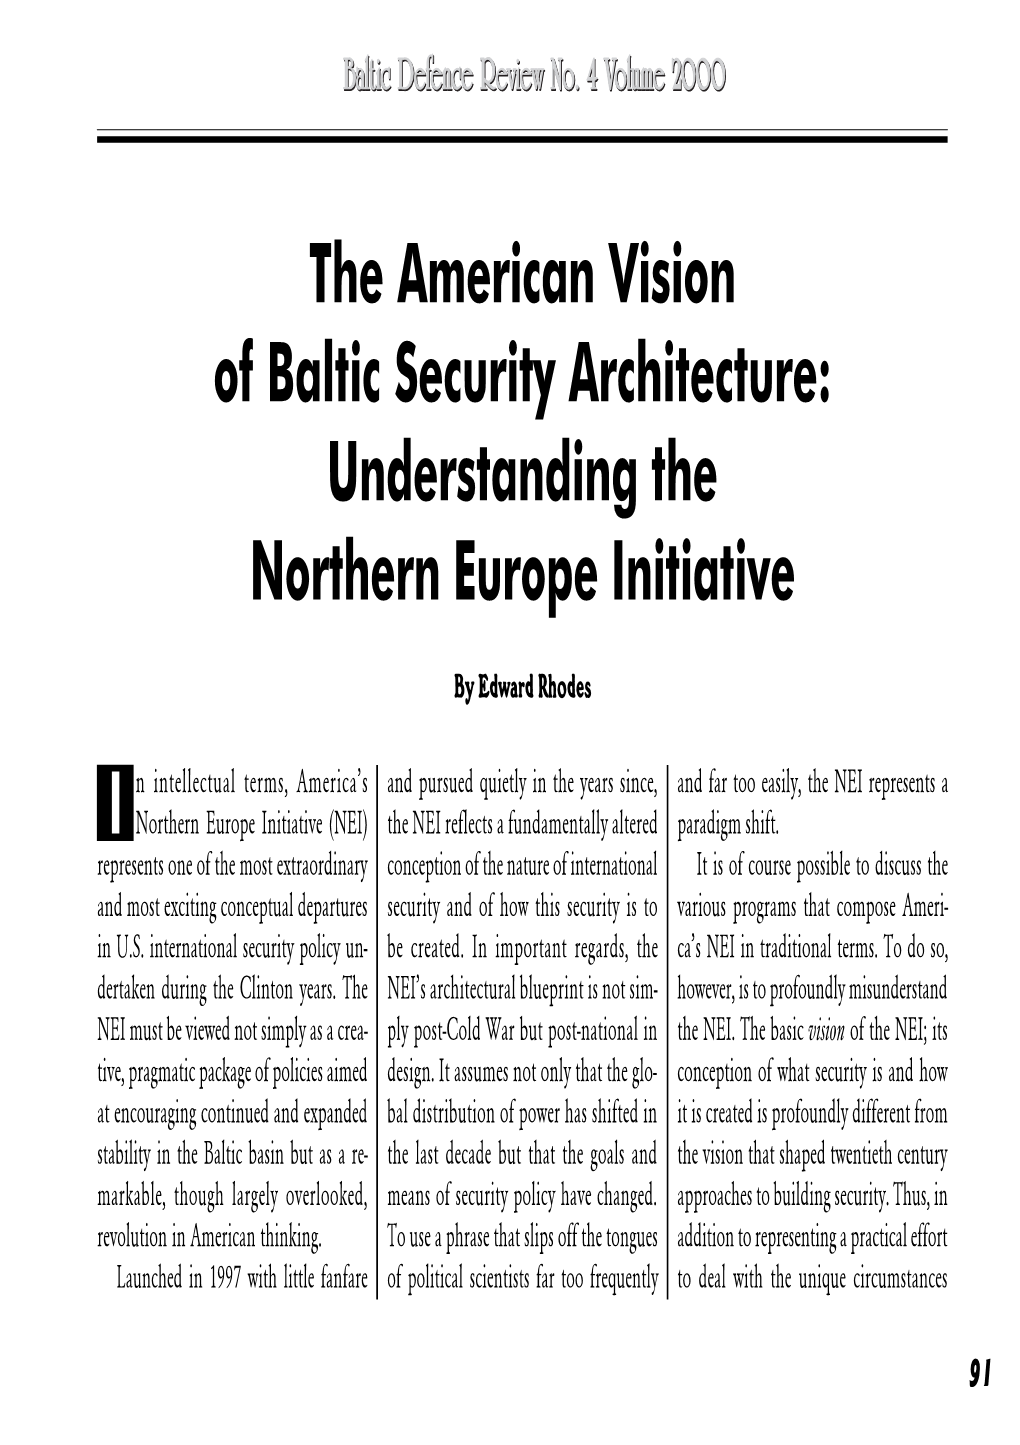 The American Vision of Baltic Security Architecture: Understanding the Northern Europe Initiative